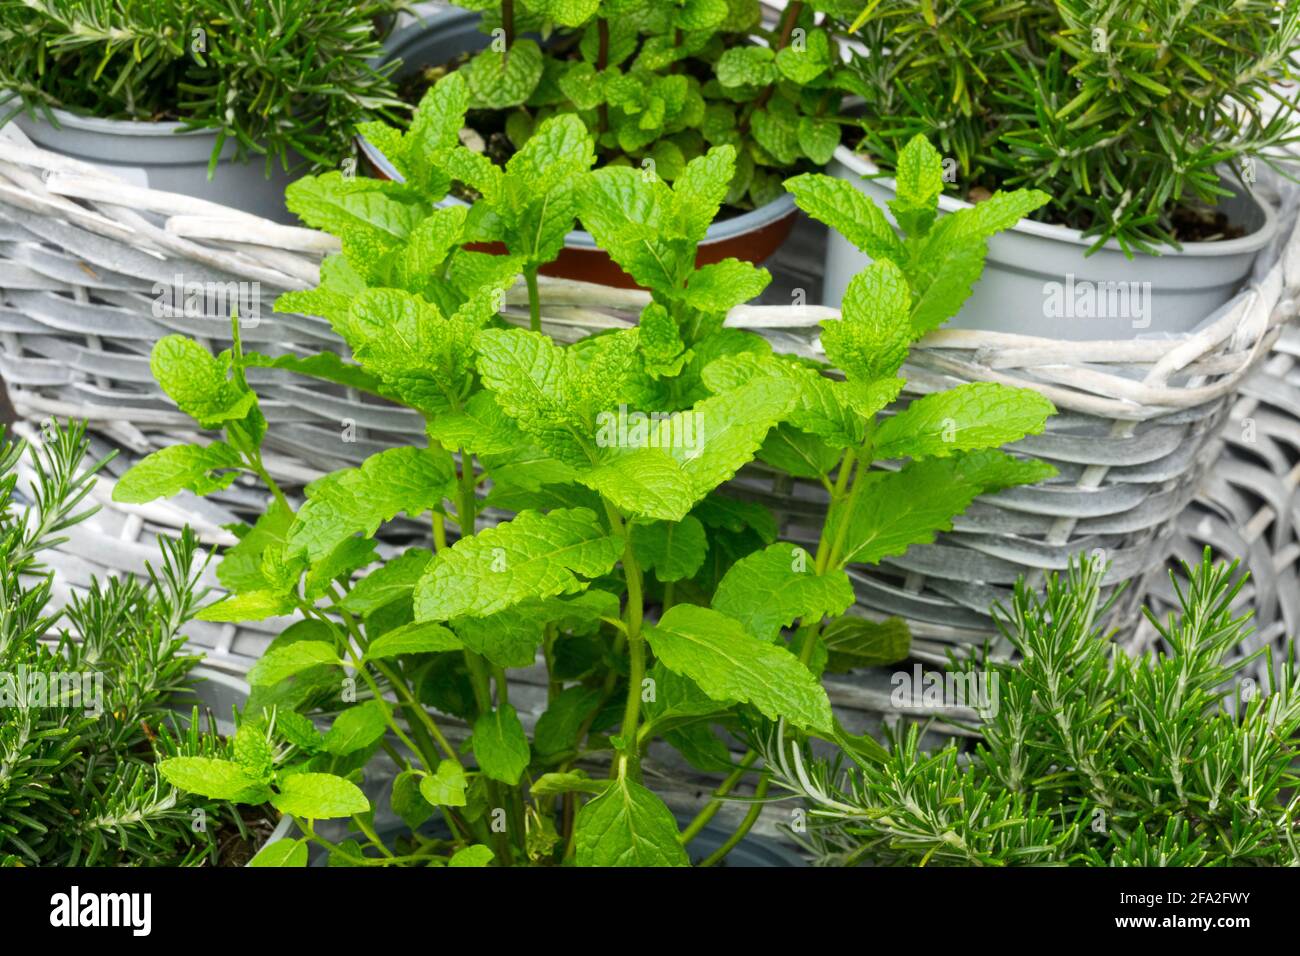 Spearmint plant growing in pot, garden herbs in basket Mentha spicata Mint and other perennial herbs Stock Photo